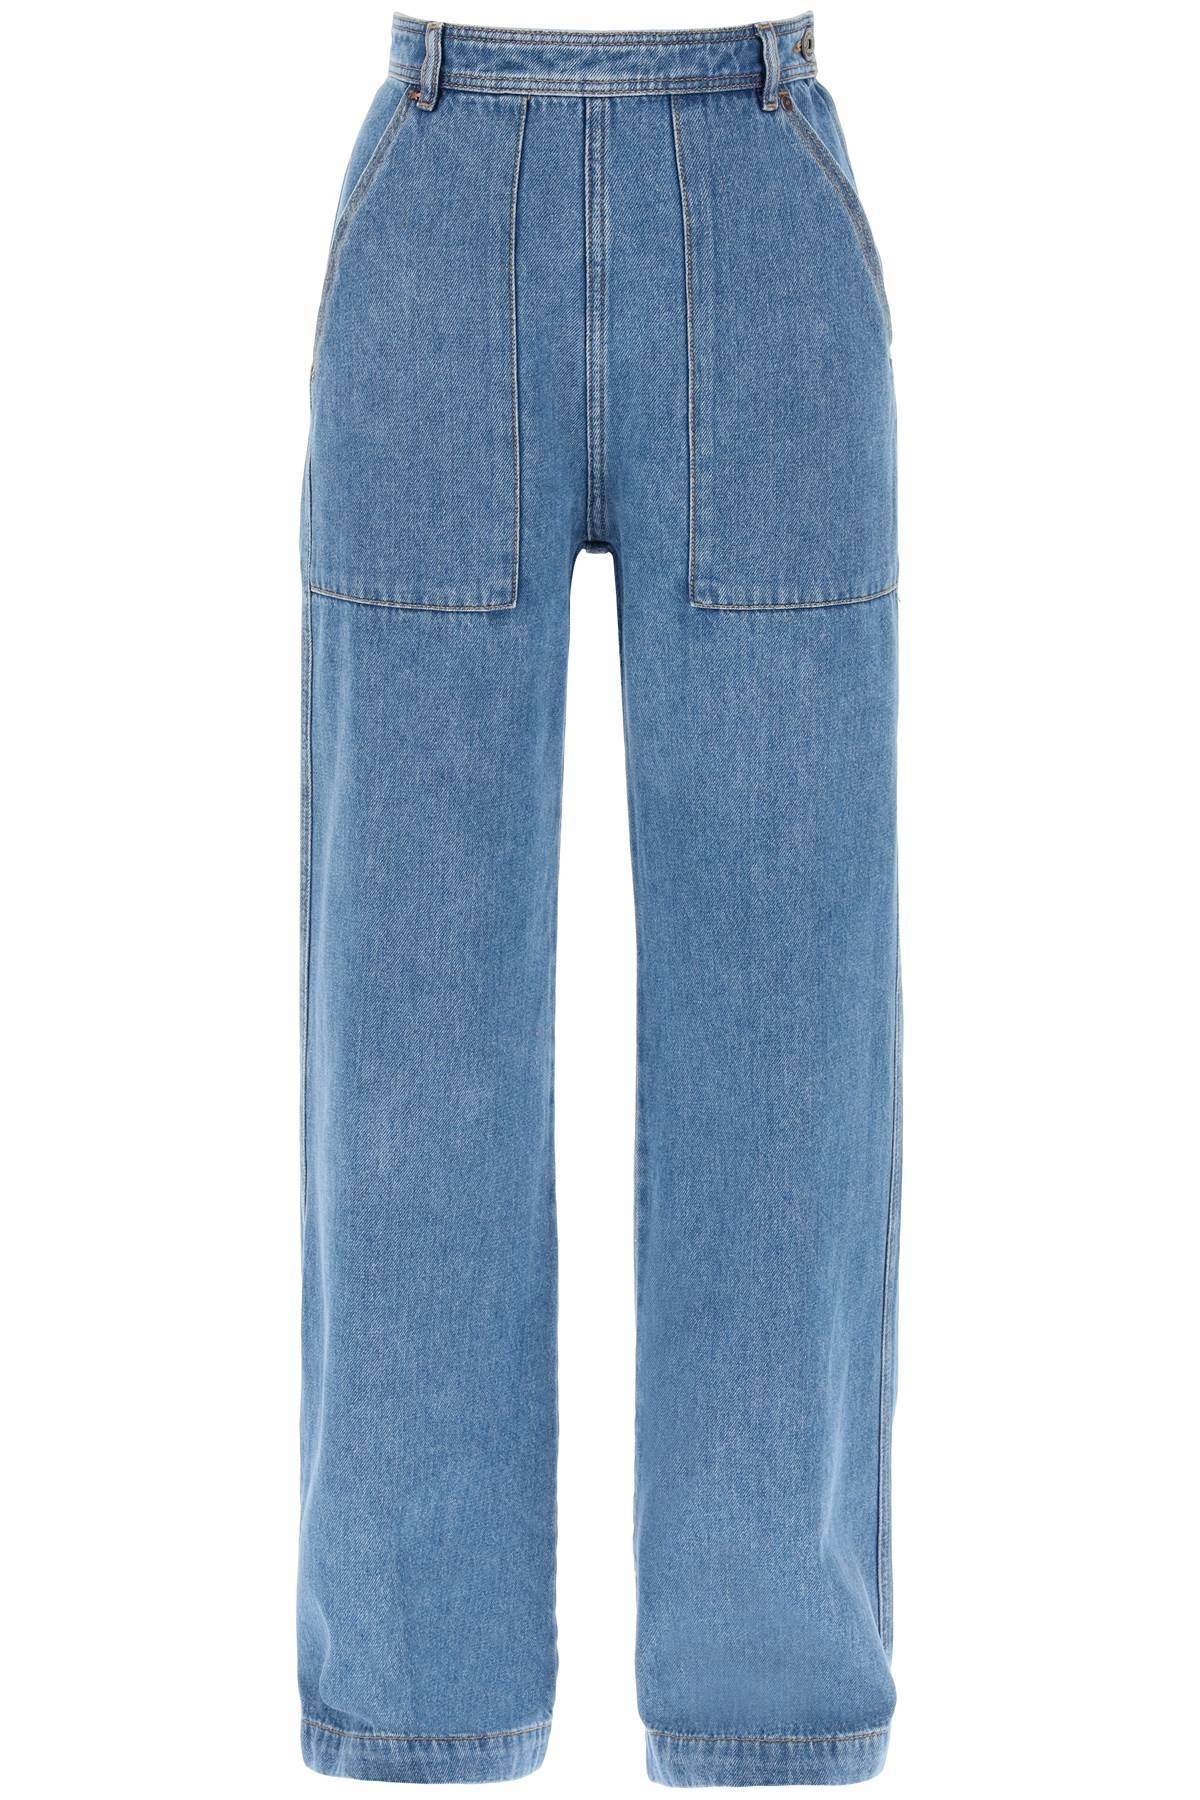 Weekend Max Mara WEEKEND MAX MARA patroni relaxed fit jeans